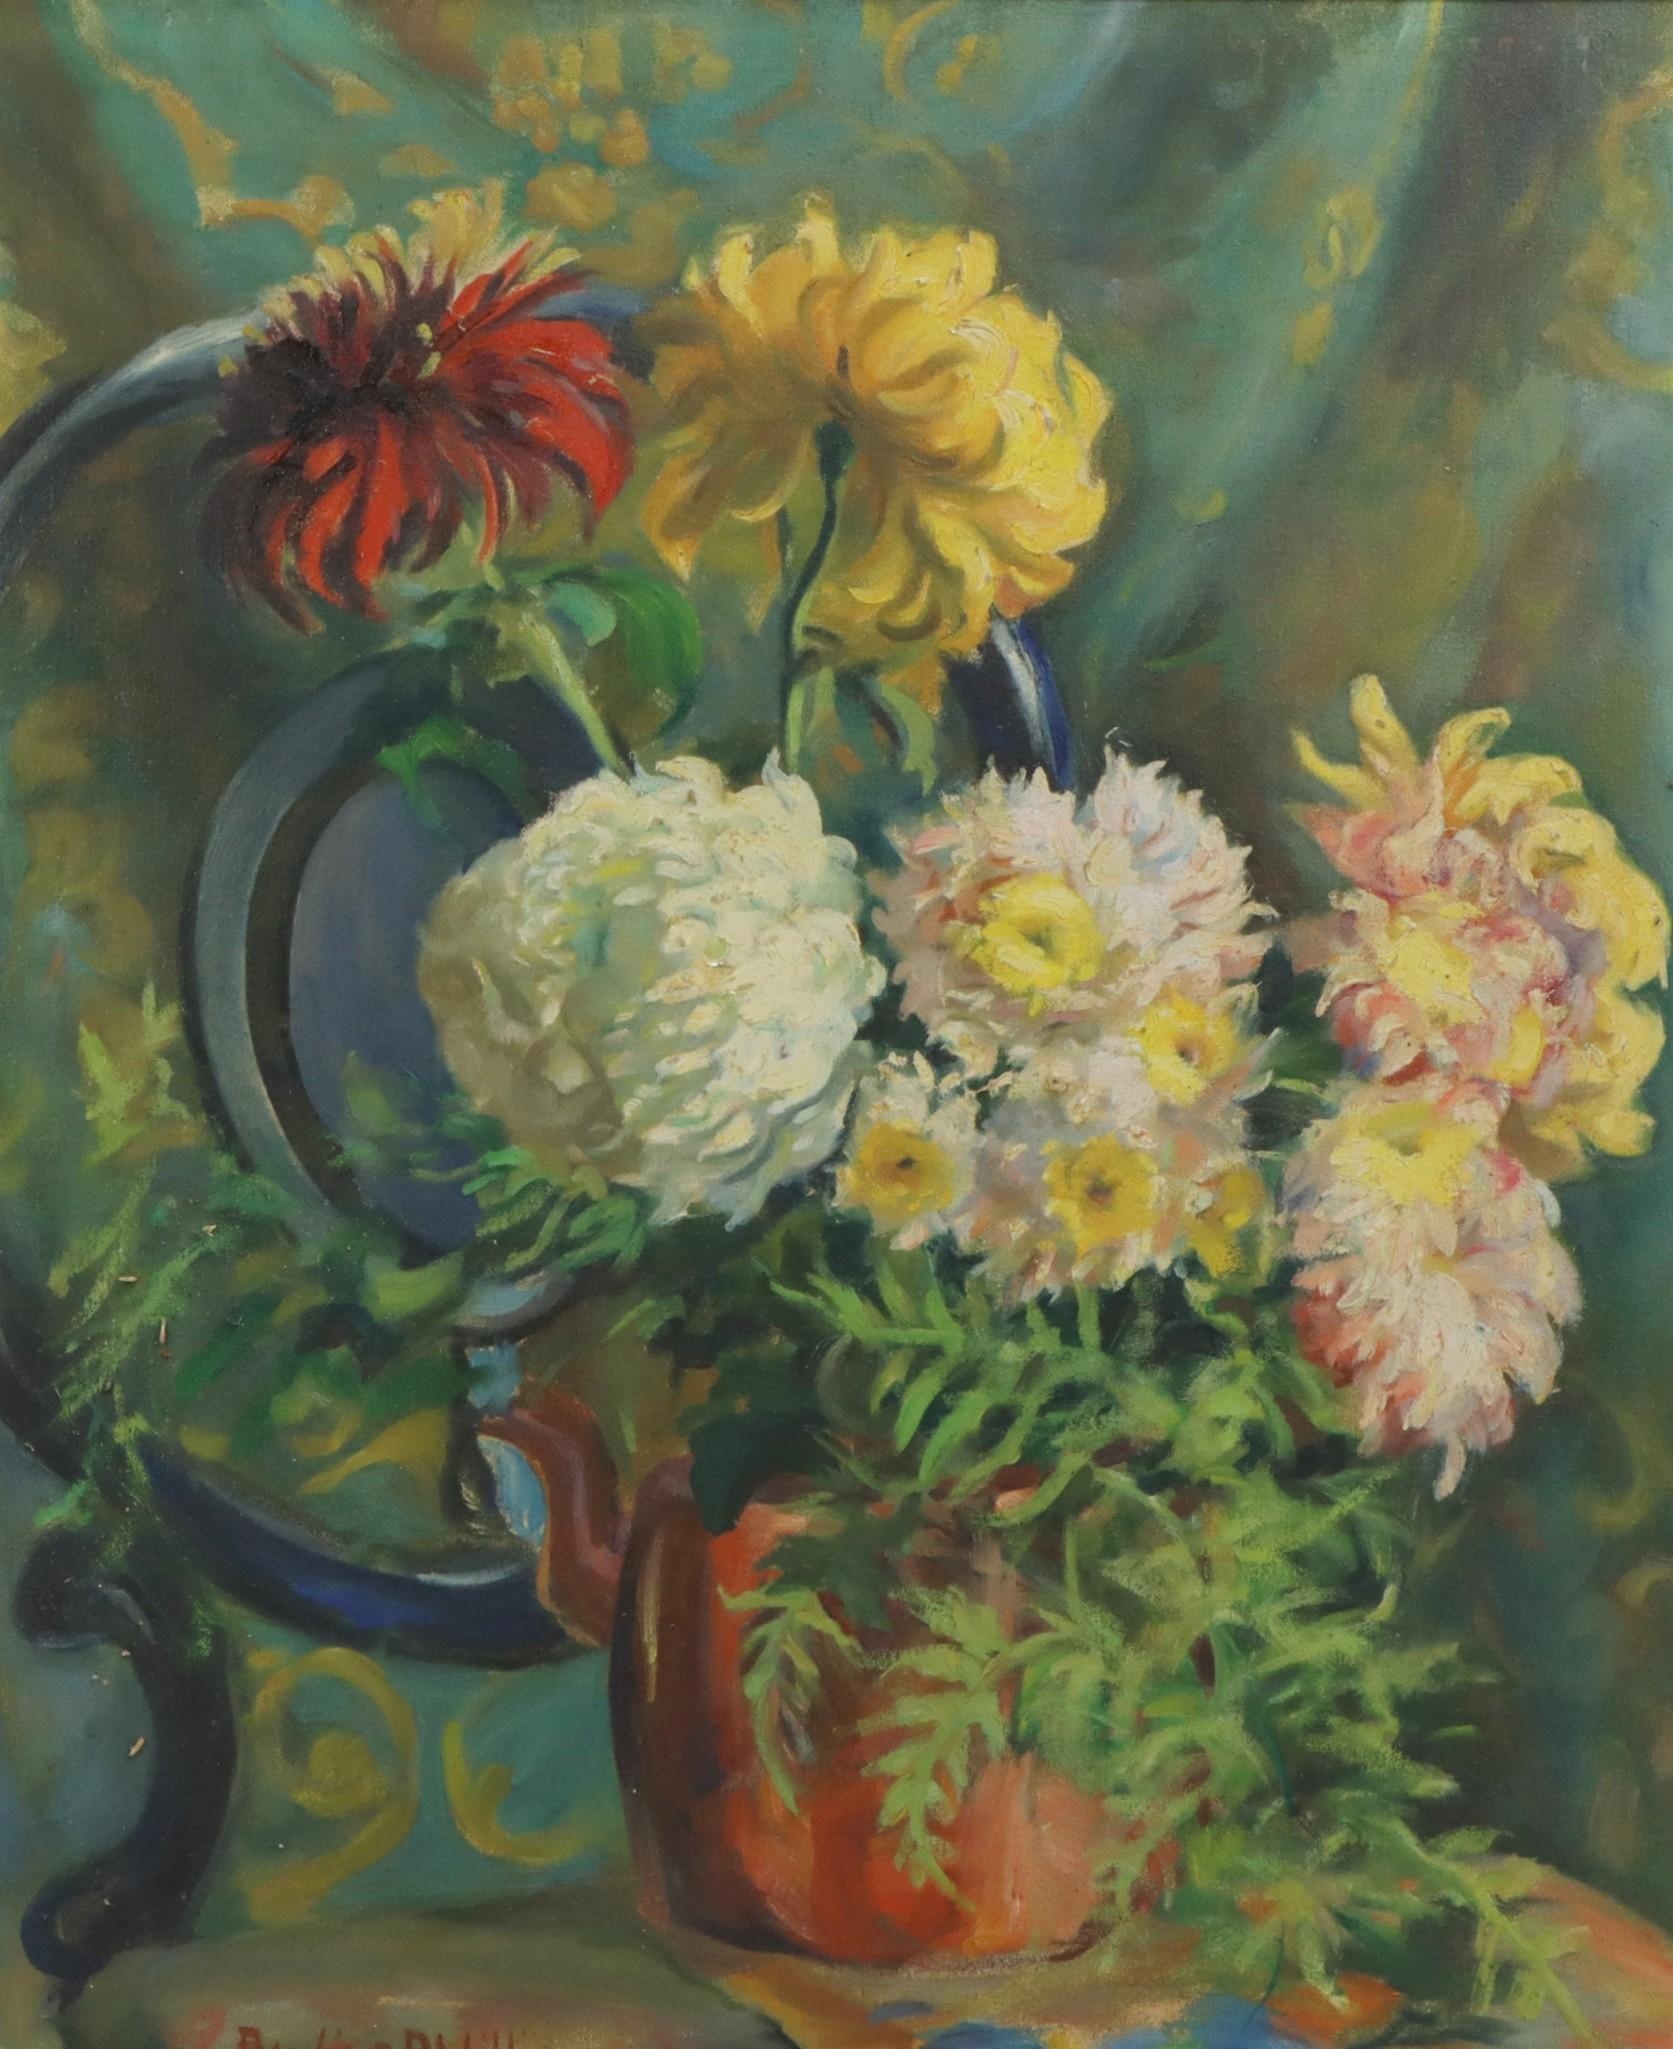 Artwork by Pauline Williams, Chrysanthemum, Made of Oil on canvas